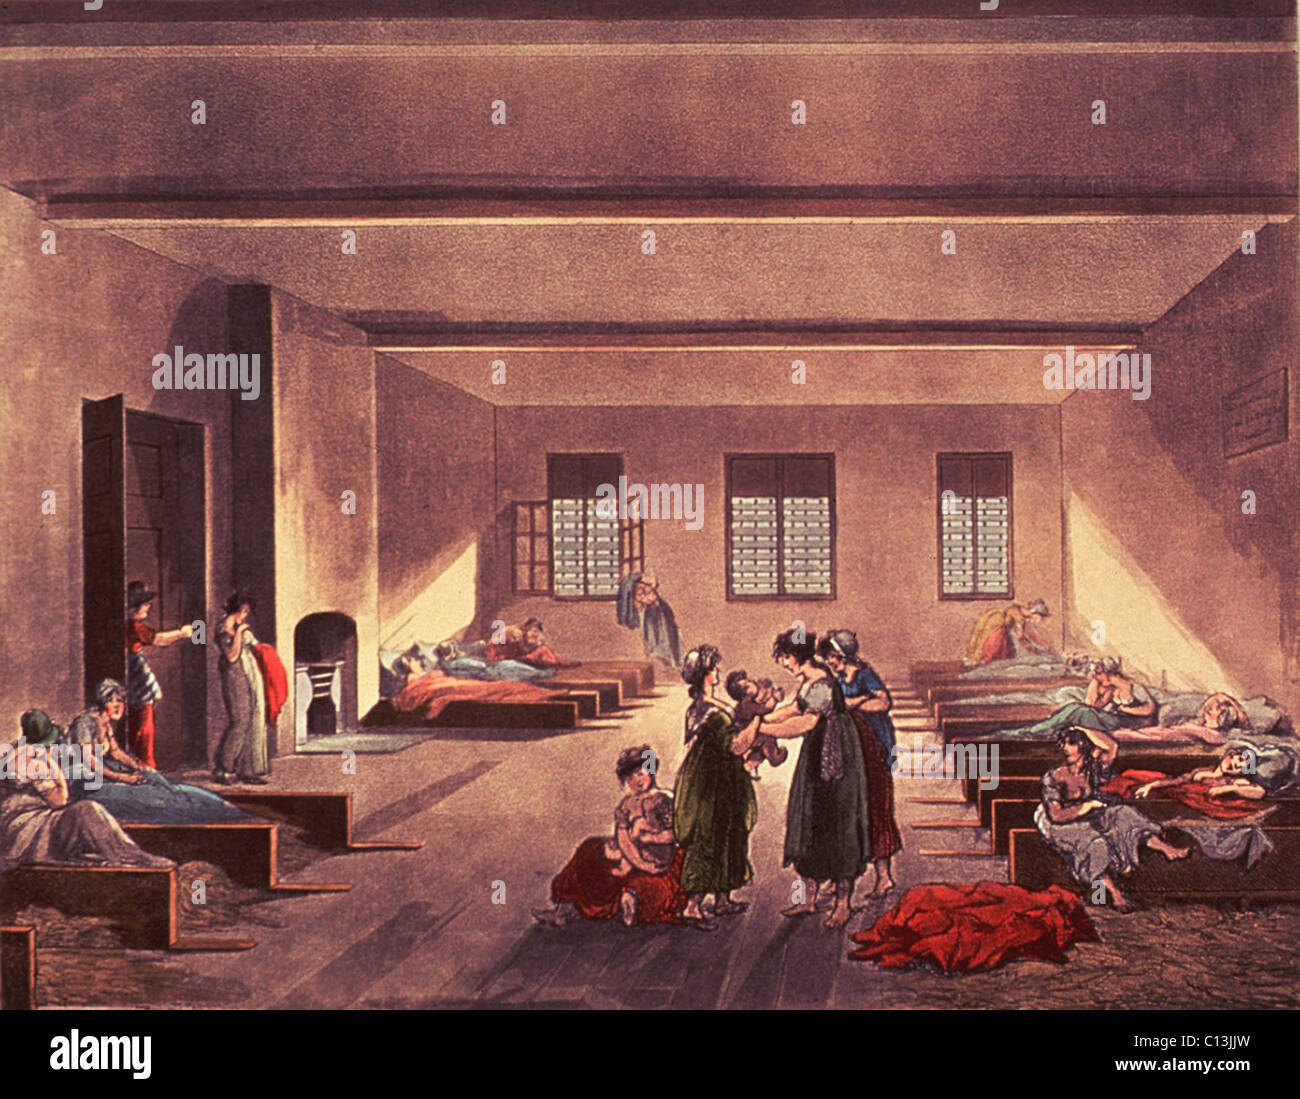 Detention room in London's Bridewell Hospital, for homeless, impoverished, and probably single or unwed mothers. British Poor Law required paupers be returned to their rural parishes, who were responsible for the local care of the poor. Before return, the women paupers and their children were detained in low stalls with hay for bedding. Drawing by Thomas Rowlandson and Augustus Pugin, ca. 1808. Stock Photo